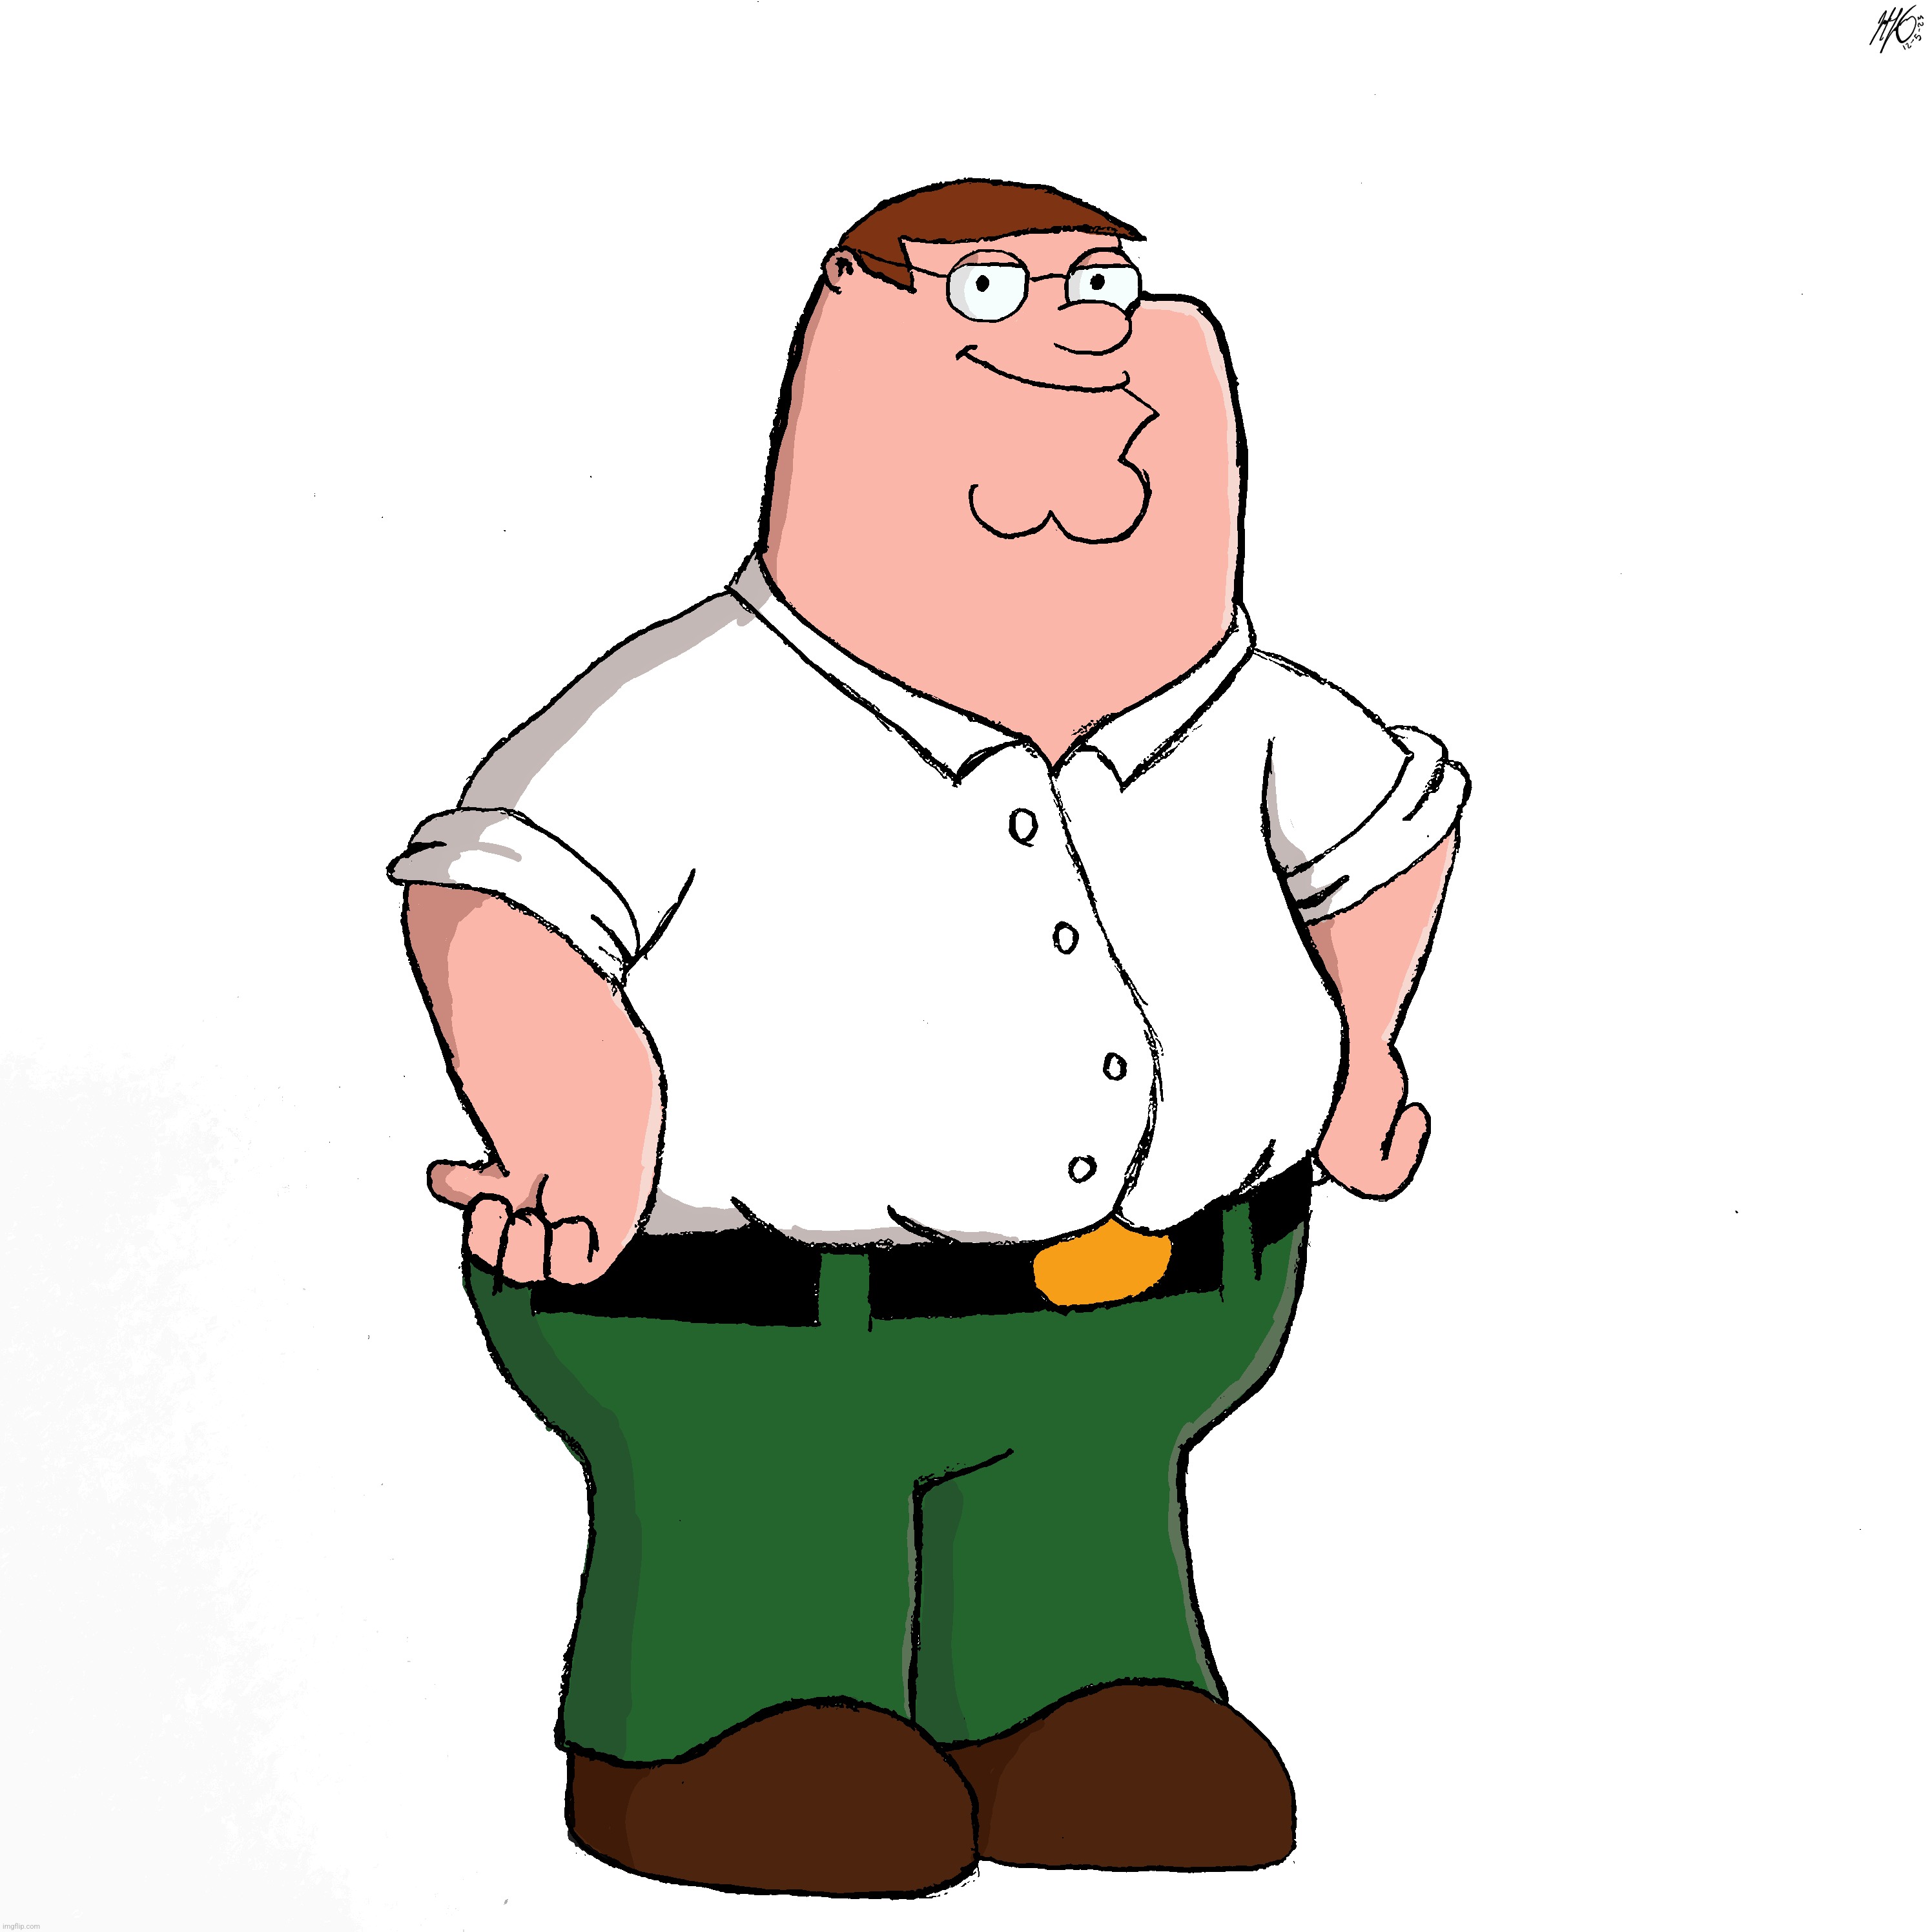 Hey Lois, i'm on imgflip, hehehehehehe! | image tagged in family guy,peter griffin | made w/ Imgflip meme maker